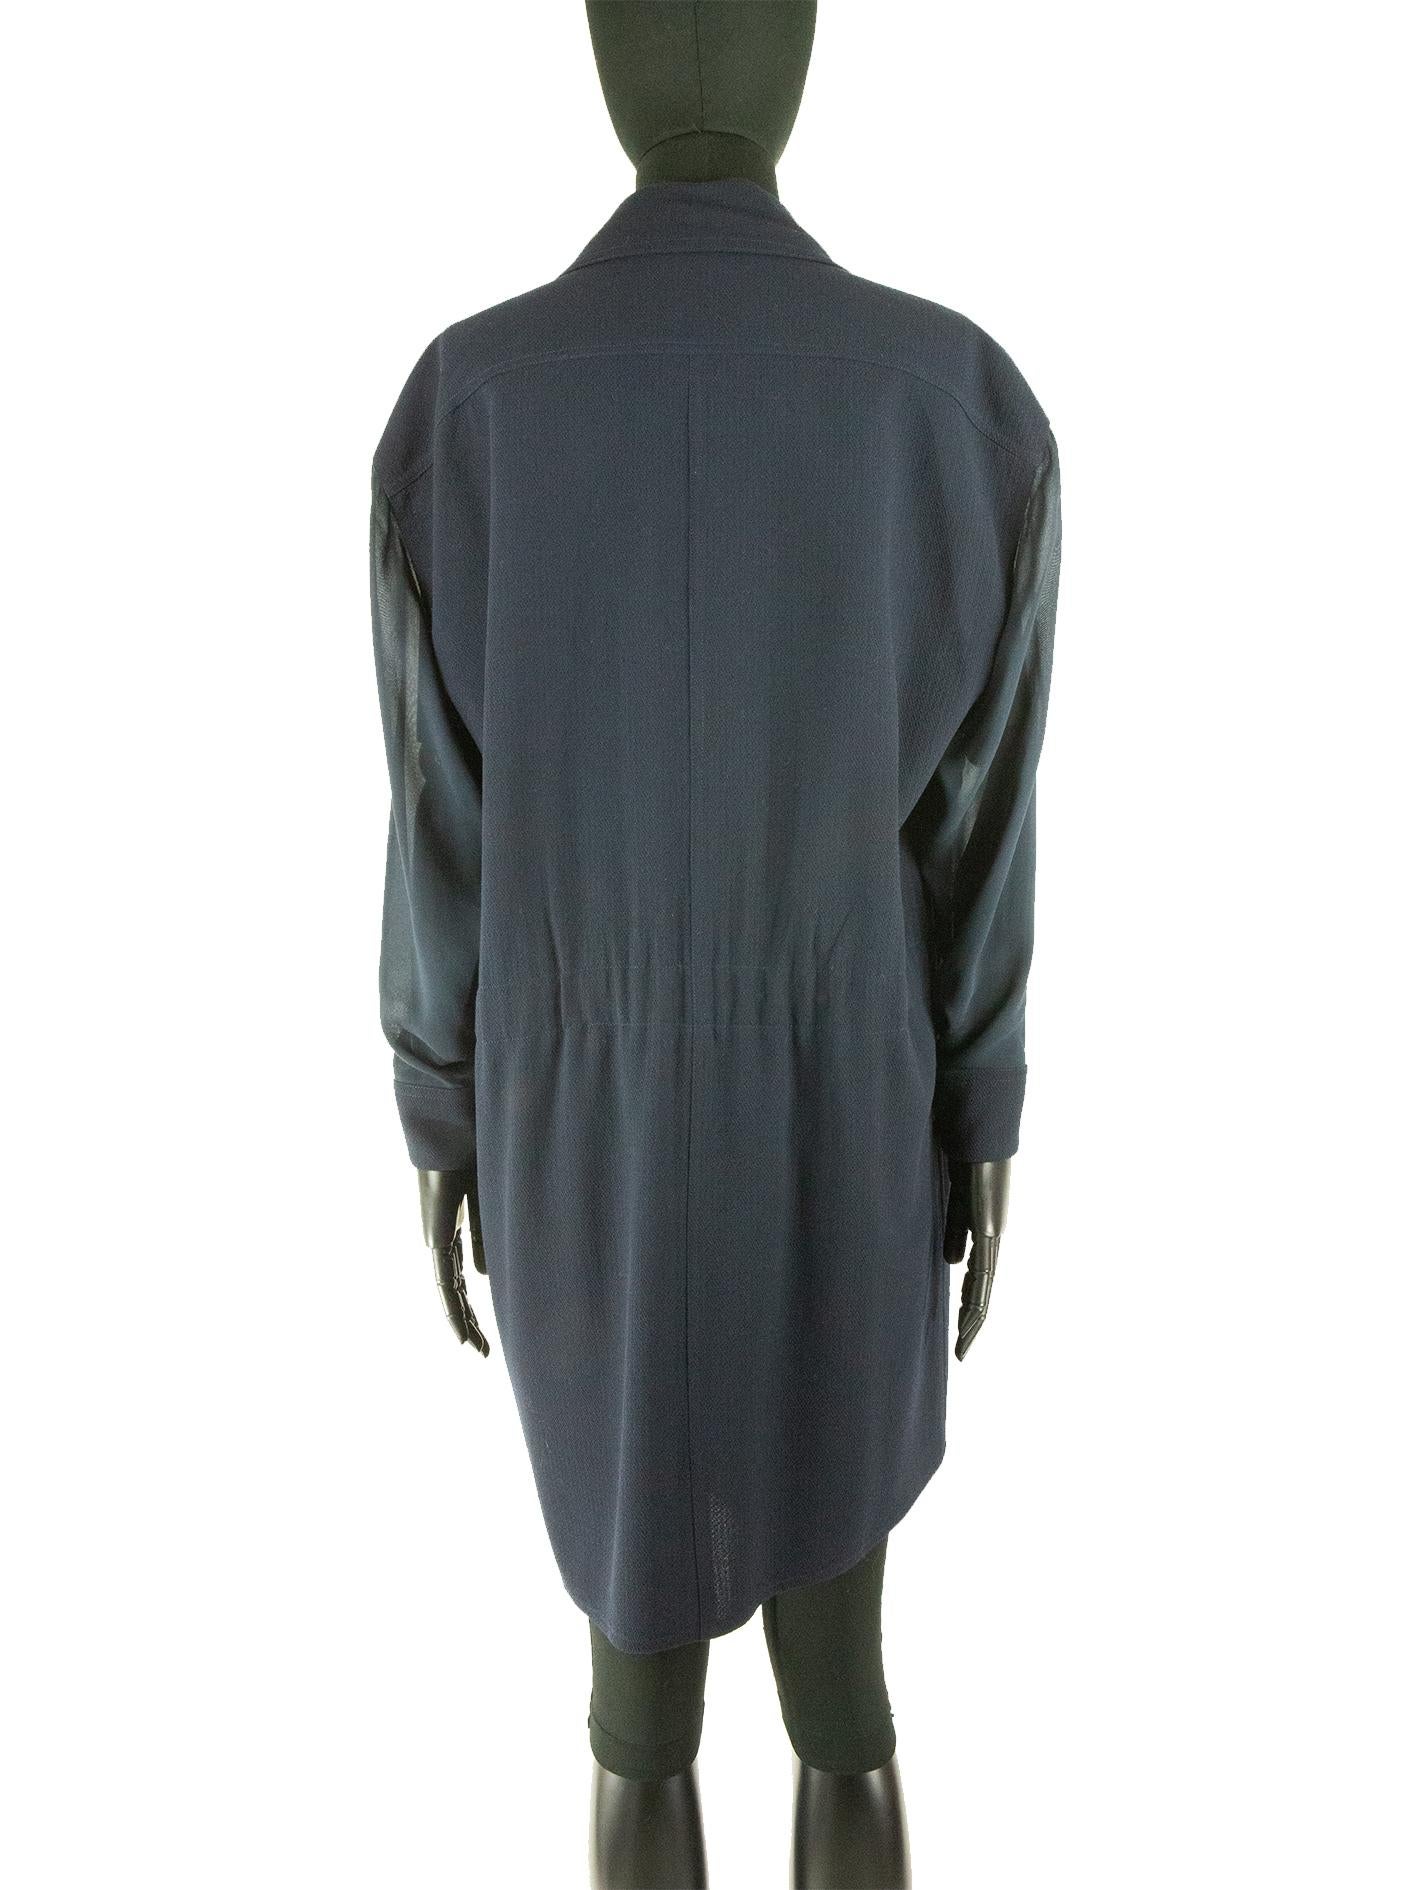 Late 80s Asymmetrical Chanel Jacket With Chiffon Sleeves In Good Condition For Sale In London, GB